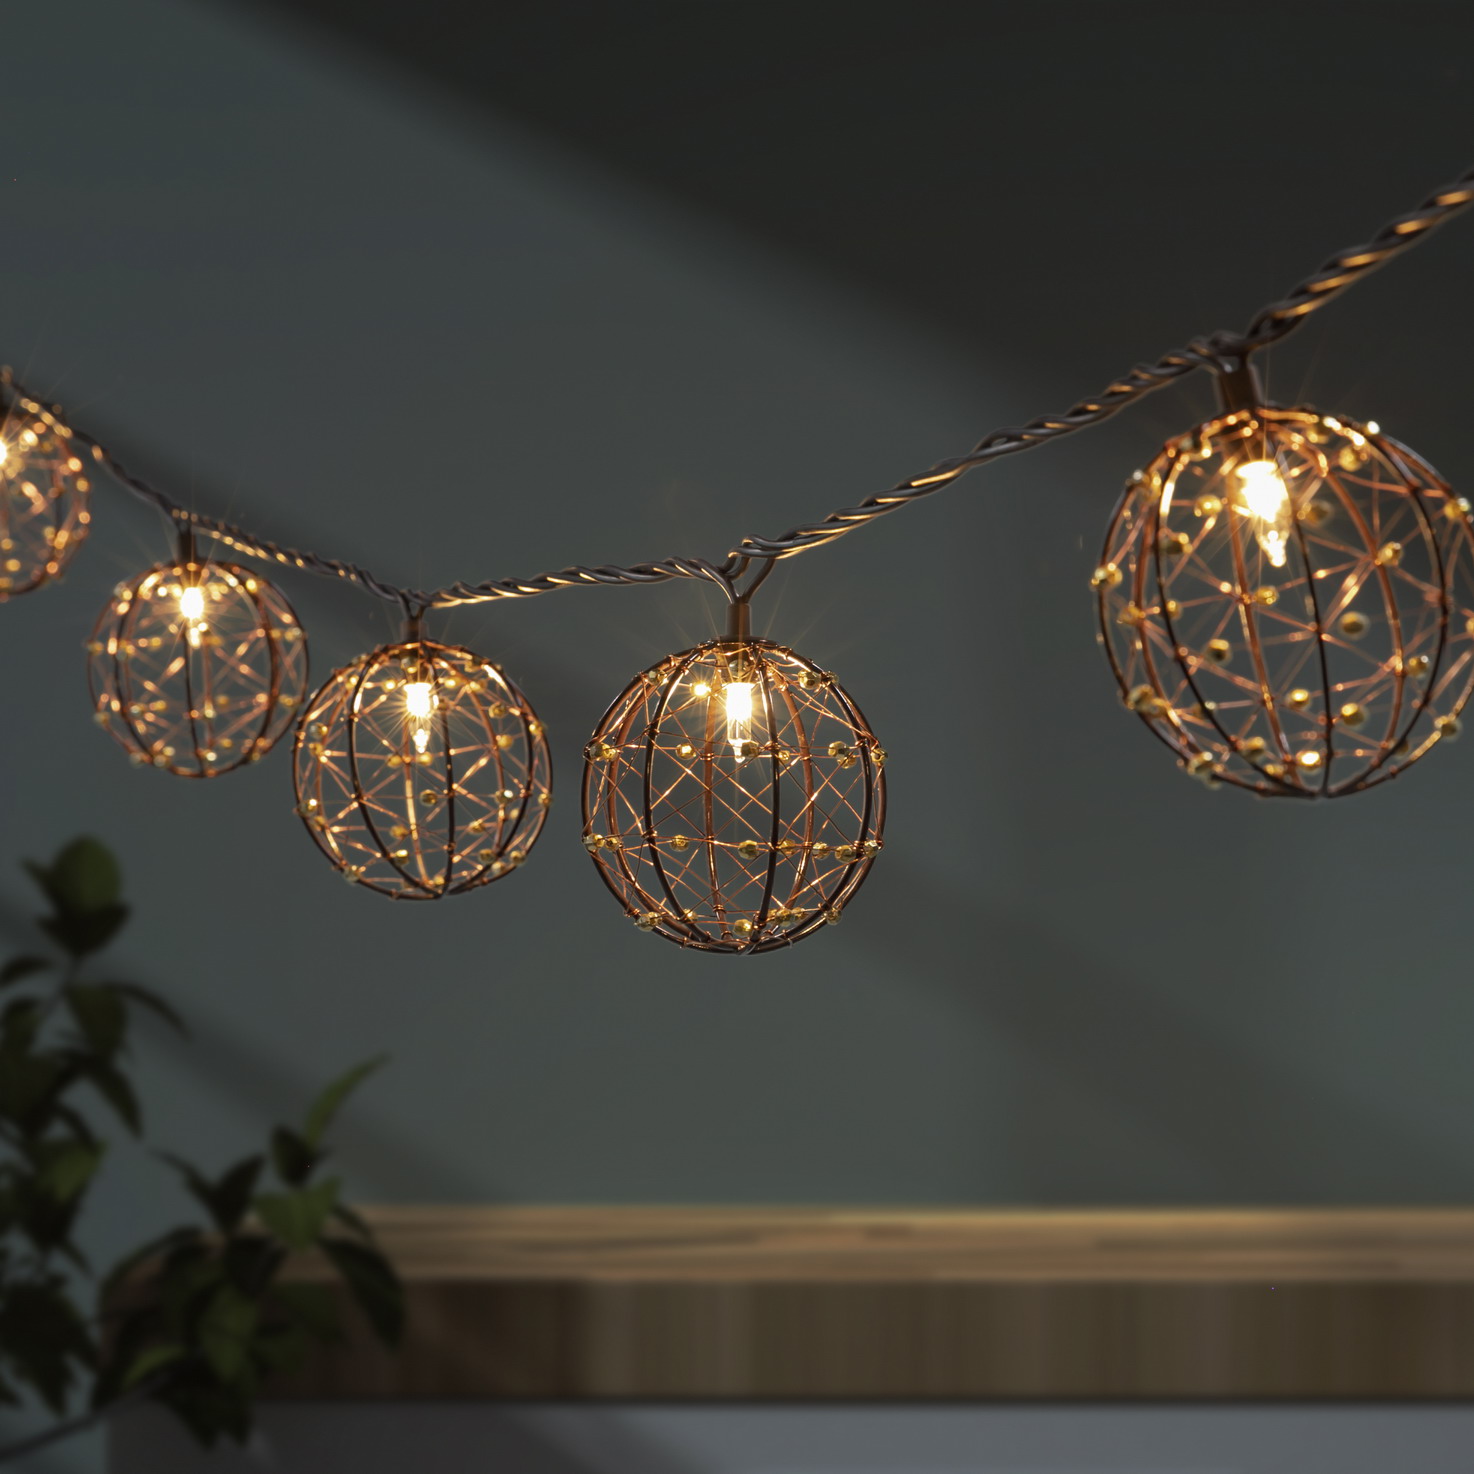 Beaded Copper Wire Ball Novelty Patio String Lights Manufacturer | ZHONGXIN Featured Image